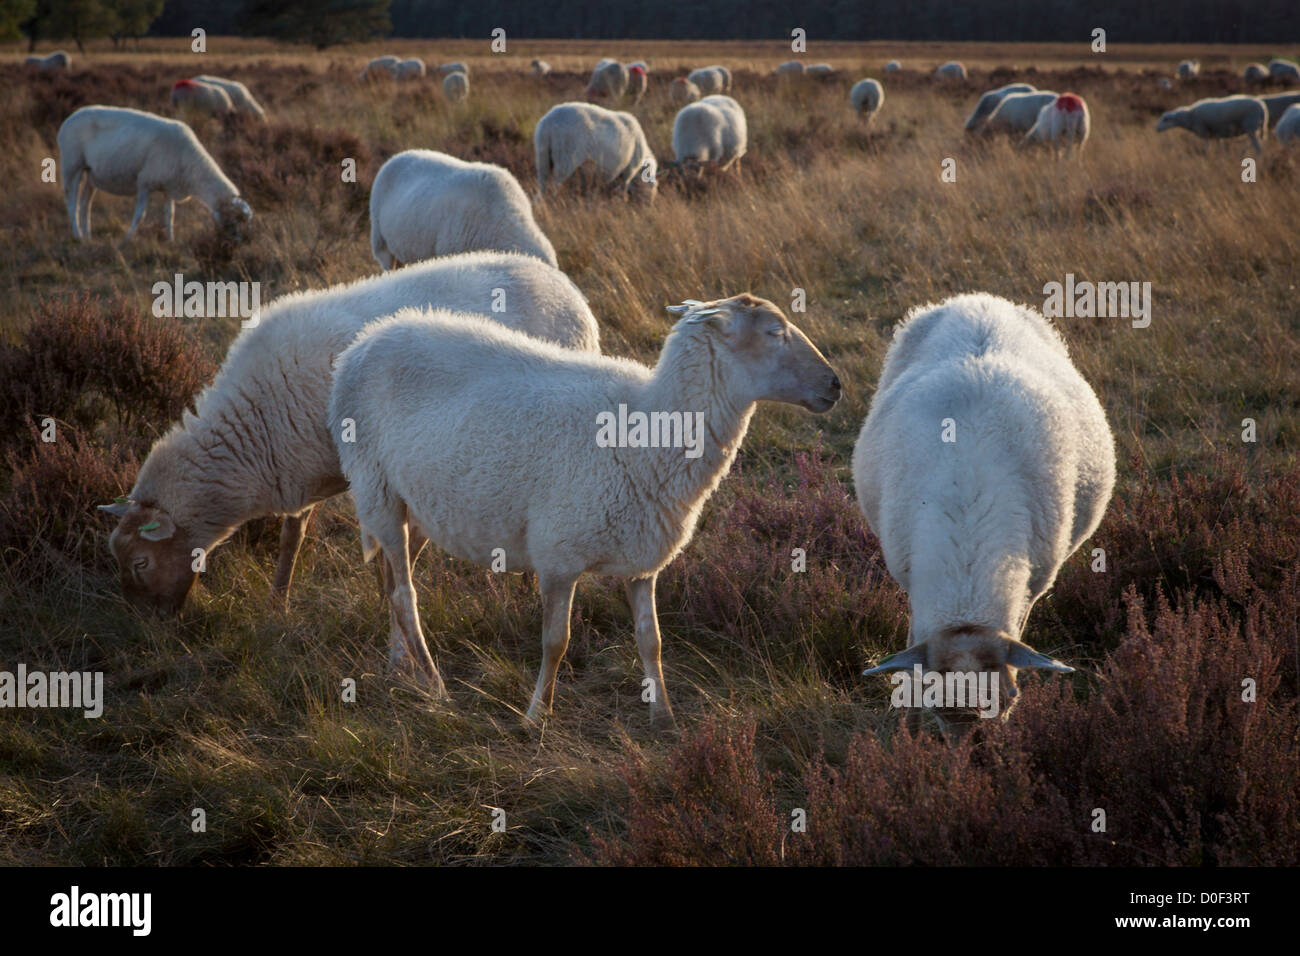 Sheepflock (officially slow food) at Strabrechtse Heide landscape evening light in the Netherlands, Europe Stock Photo